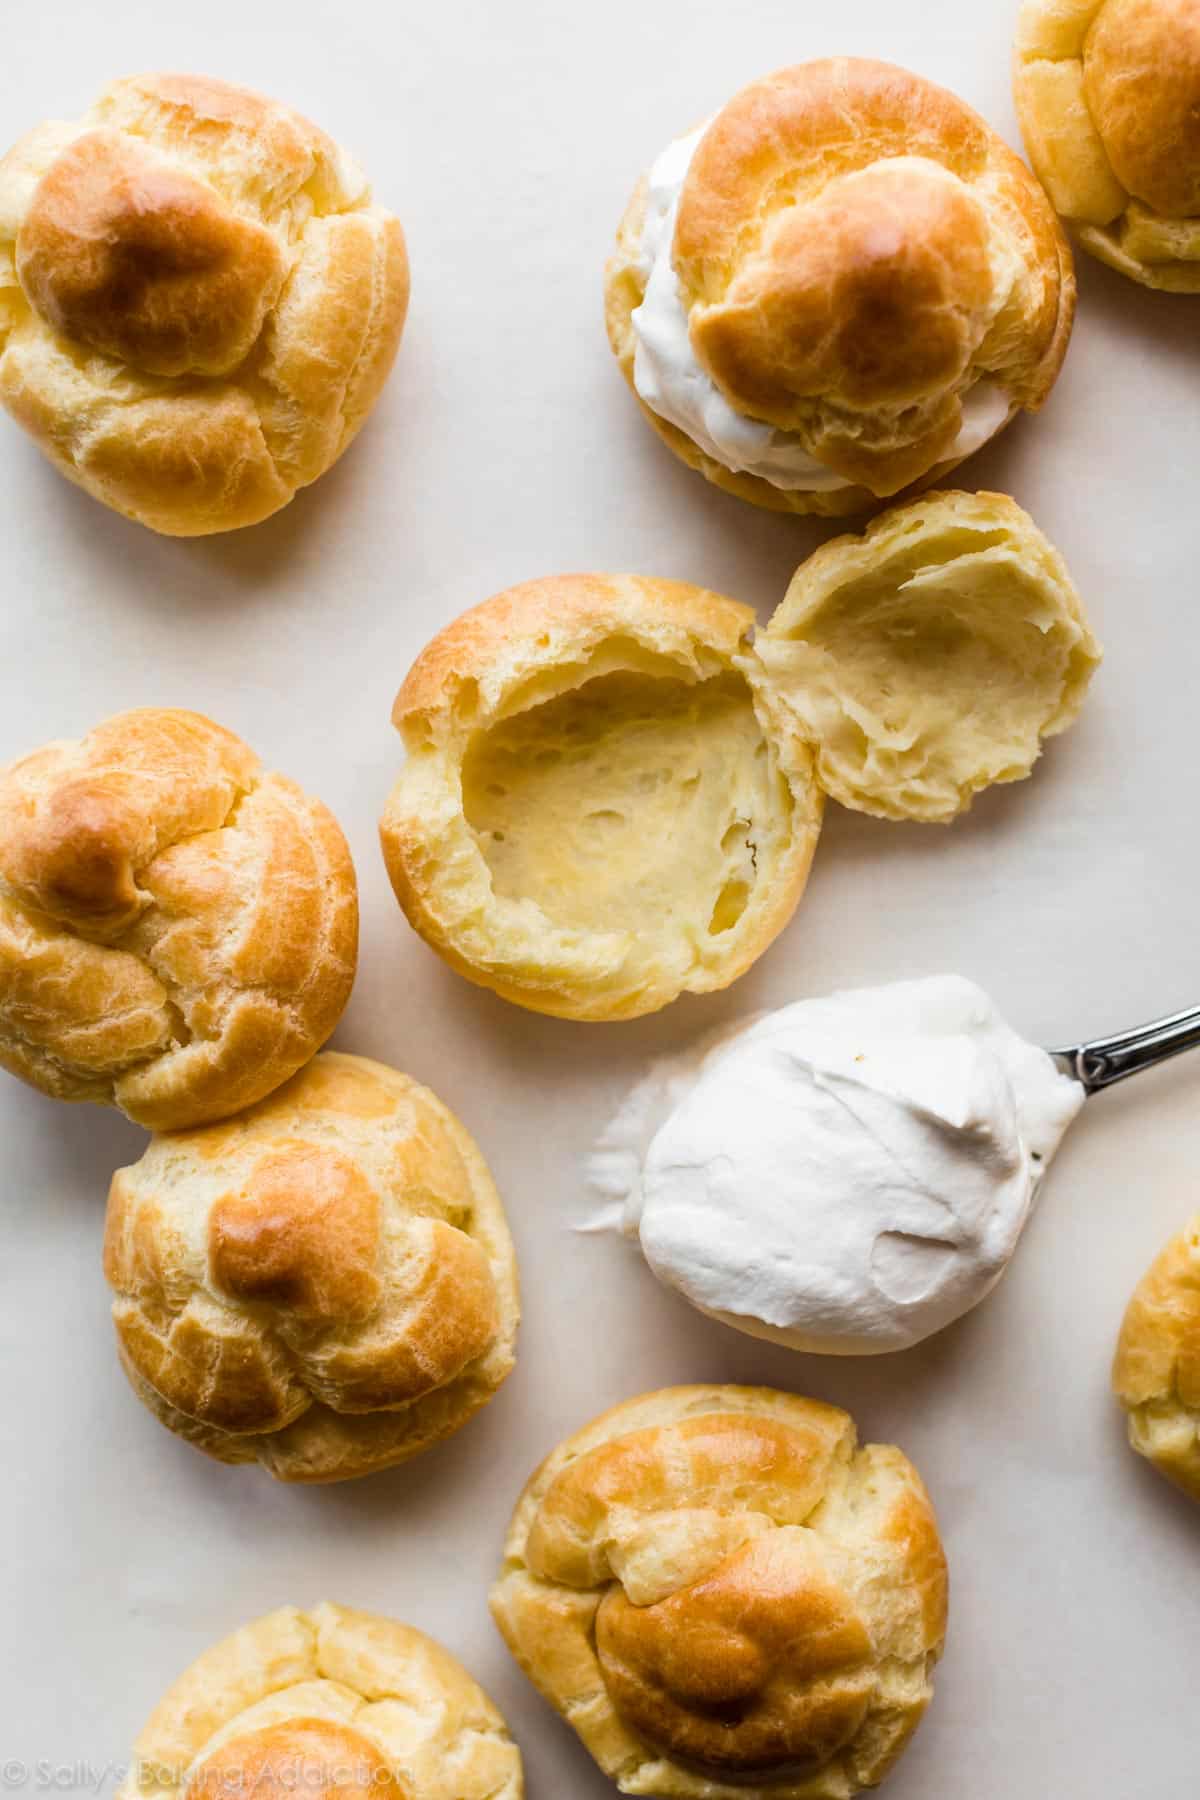 spooning whipped cream filling into baked cream puffs